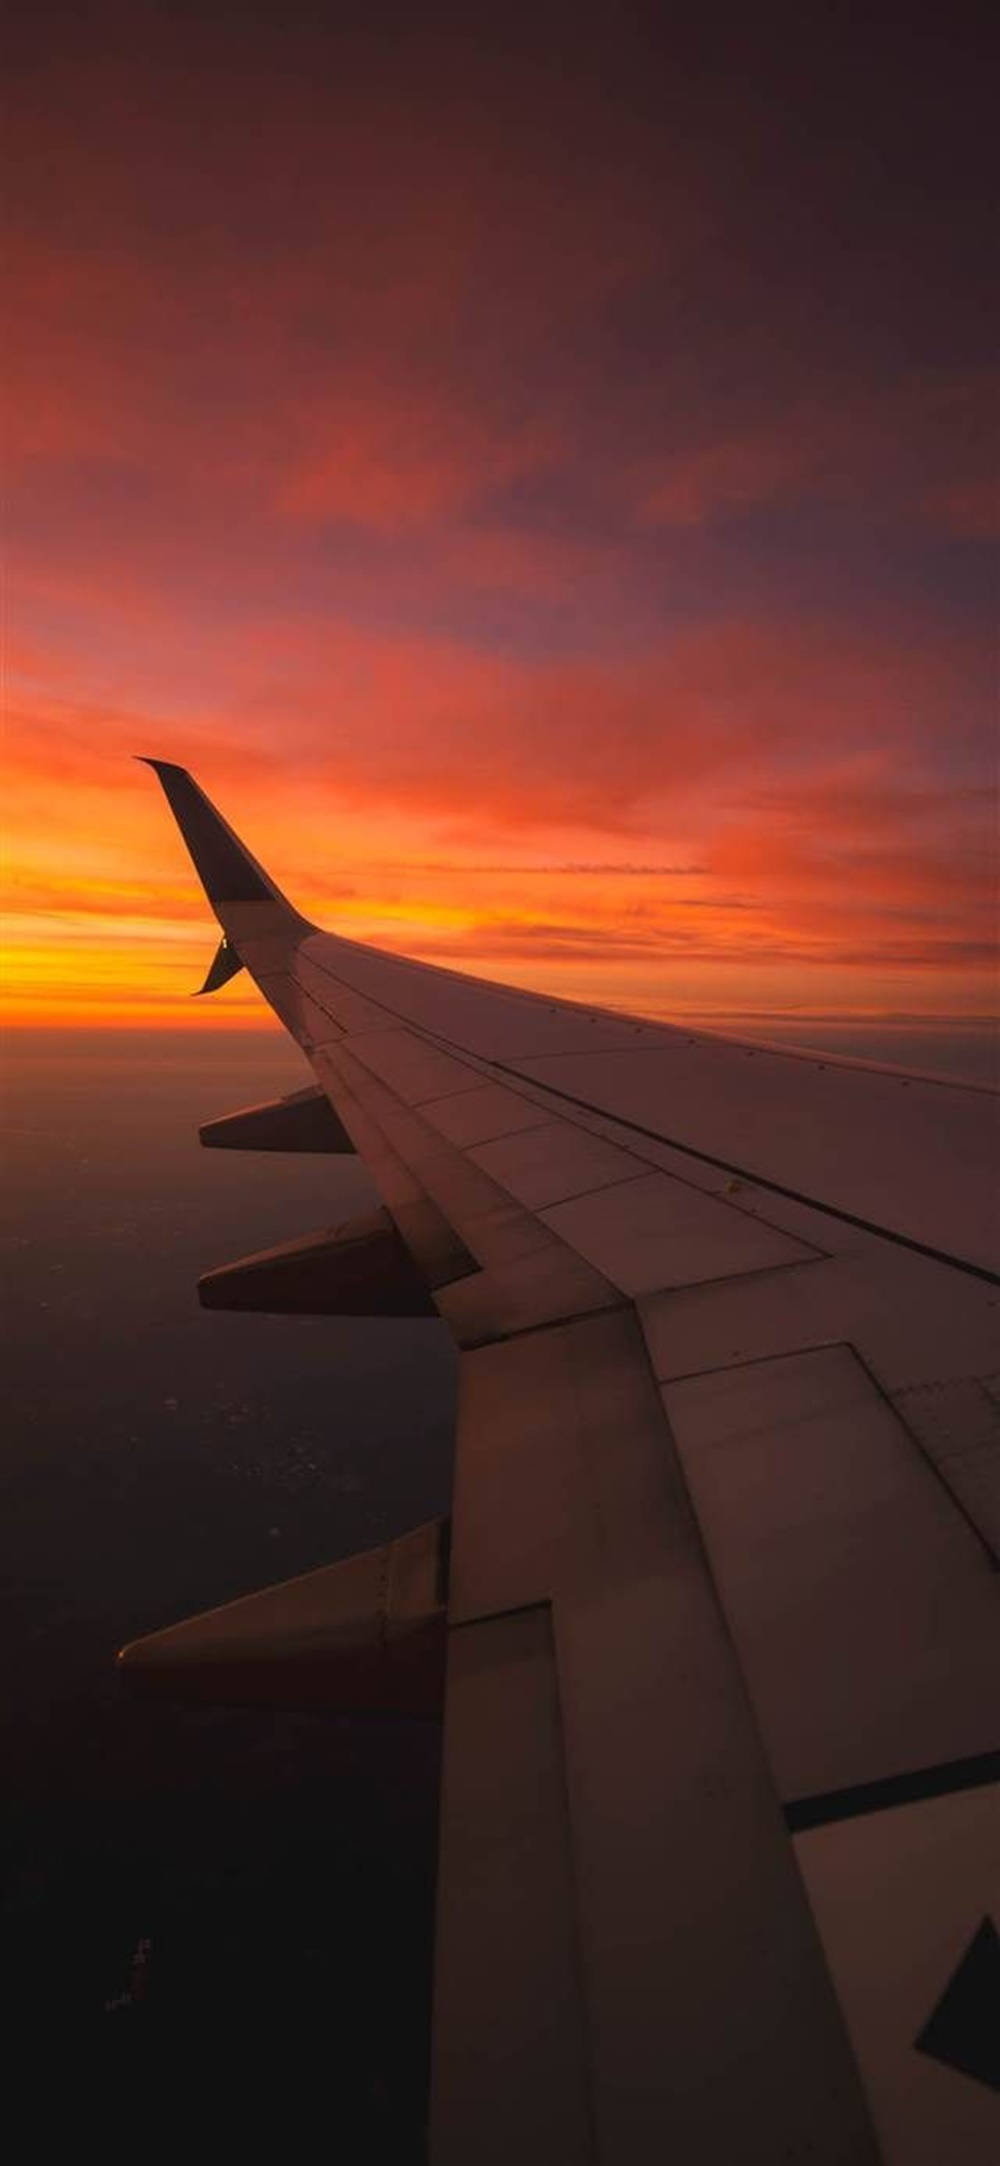 Sunset With Wing Of Airplane Android Wallpaper